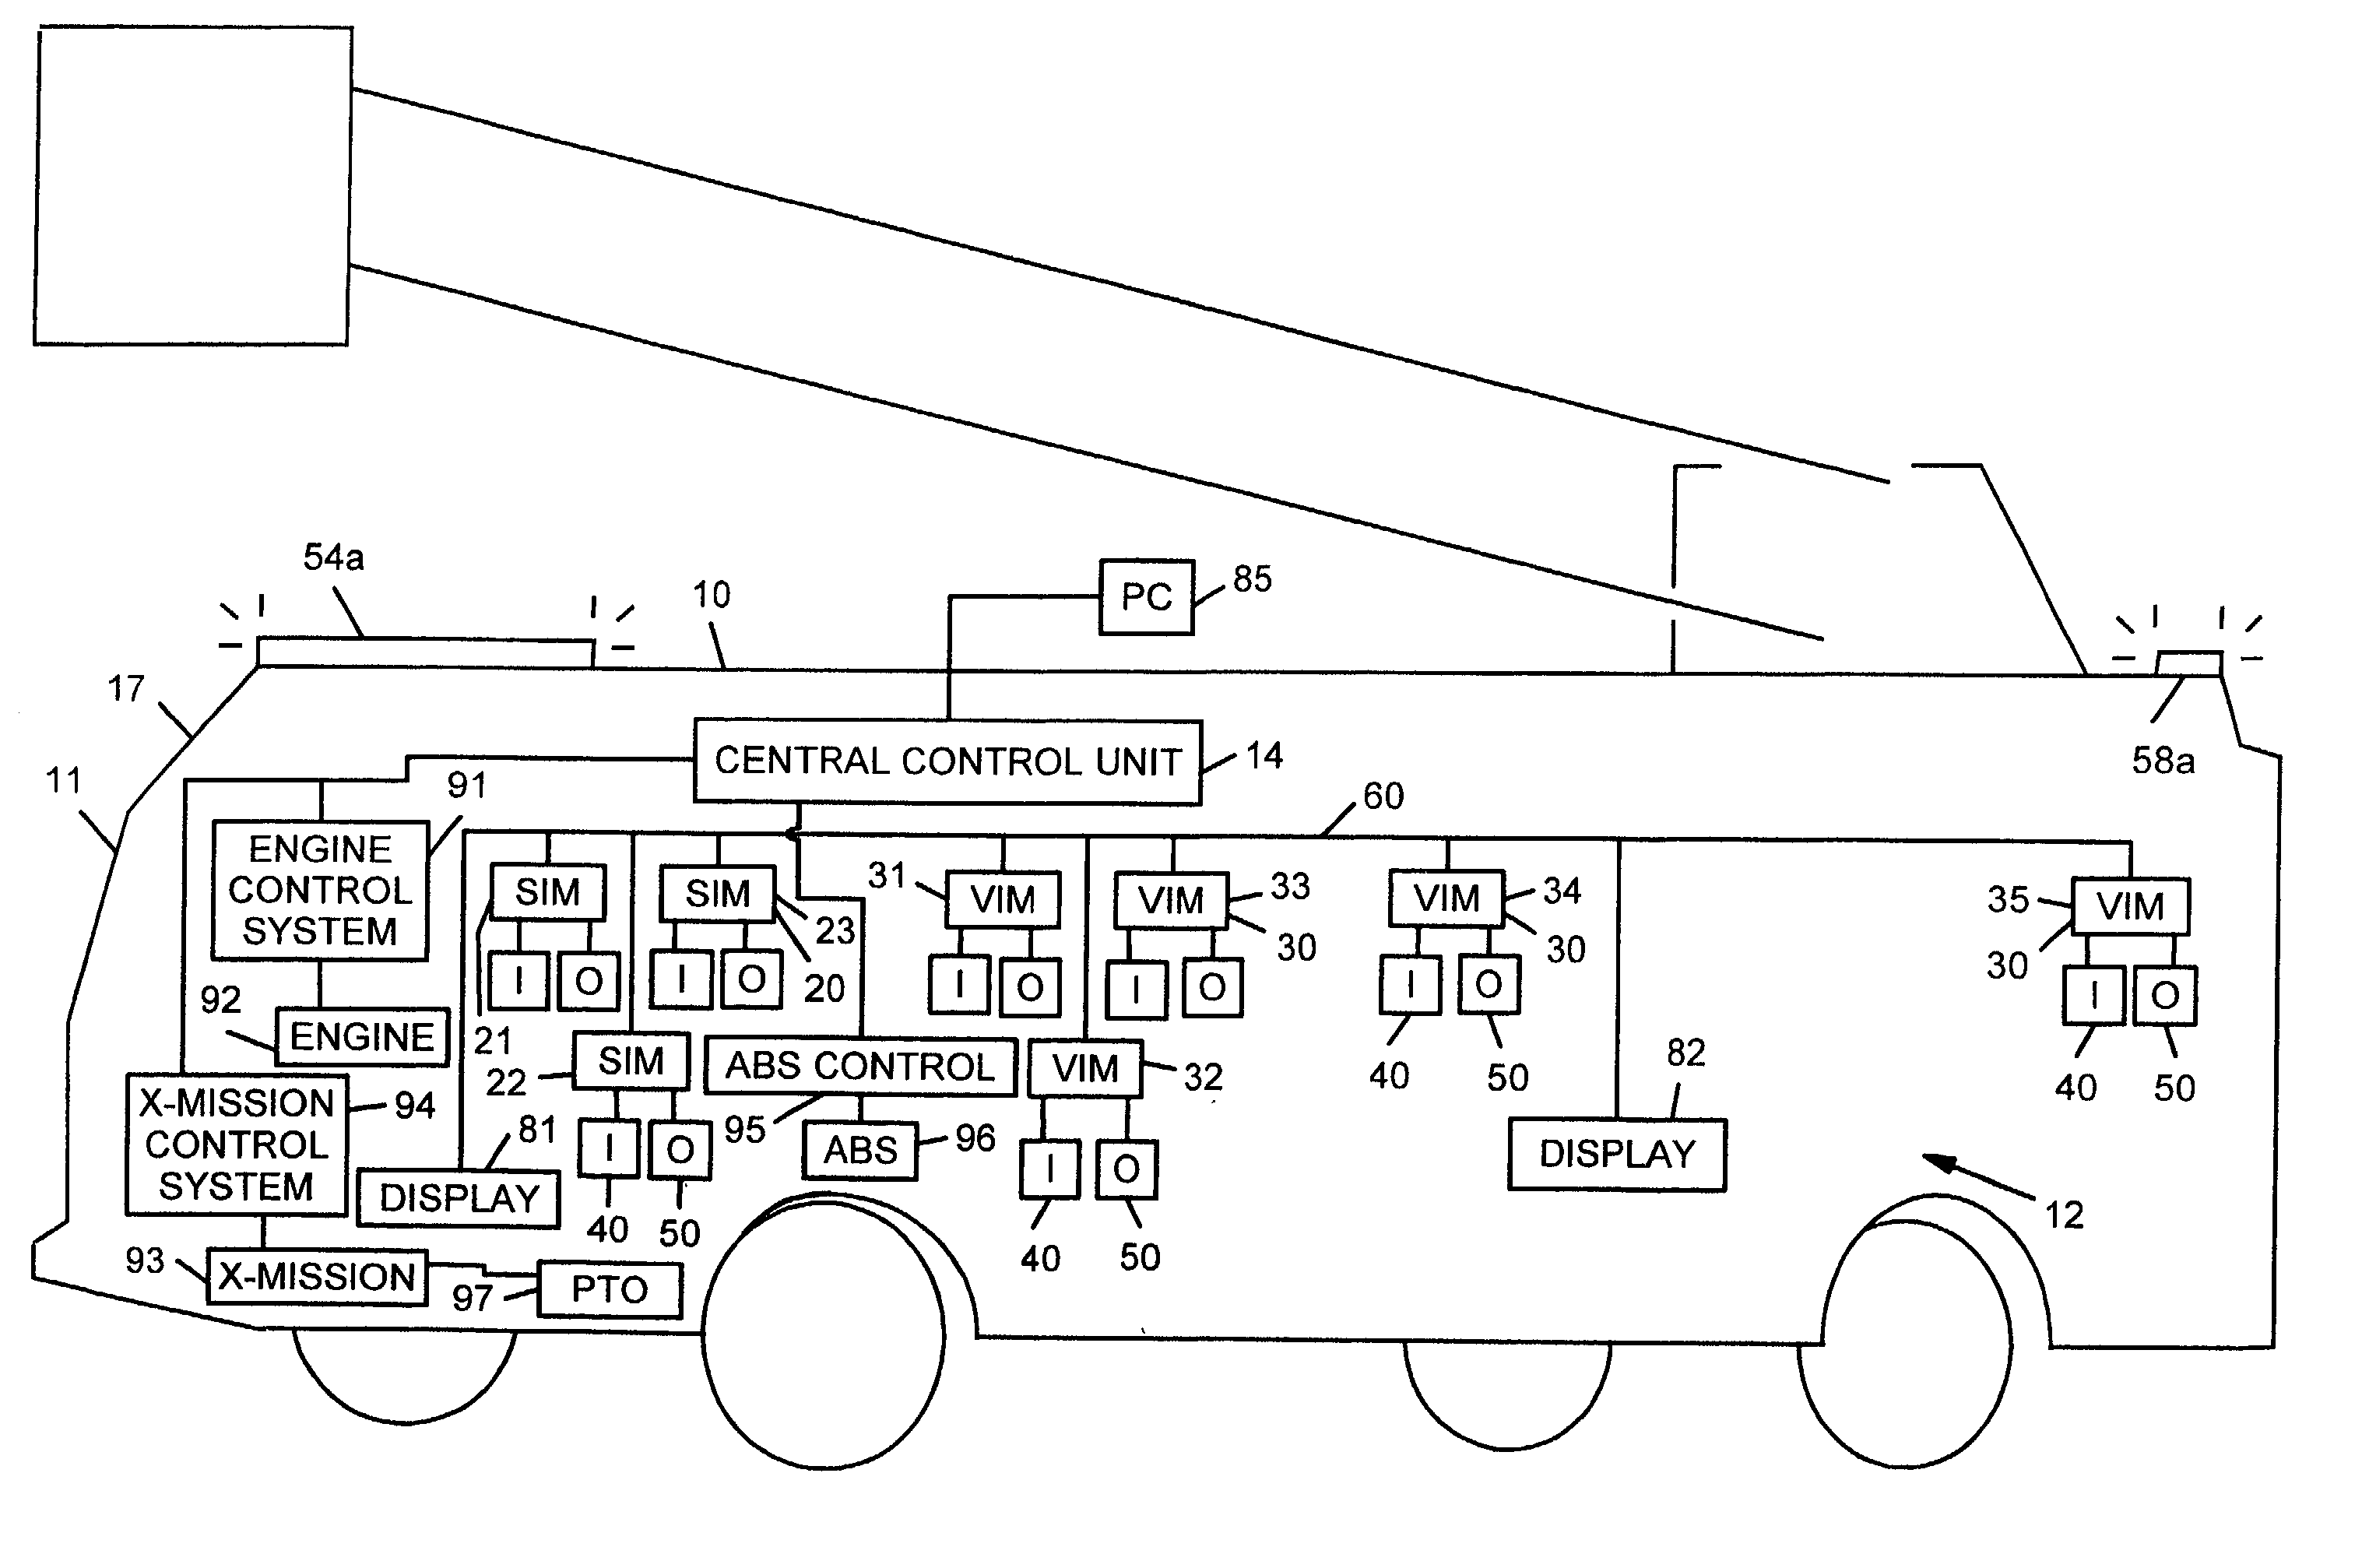 Military vehicle having cooperative control network with distributed I/O interfacing